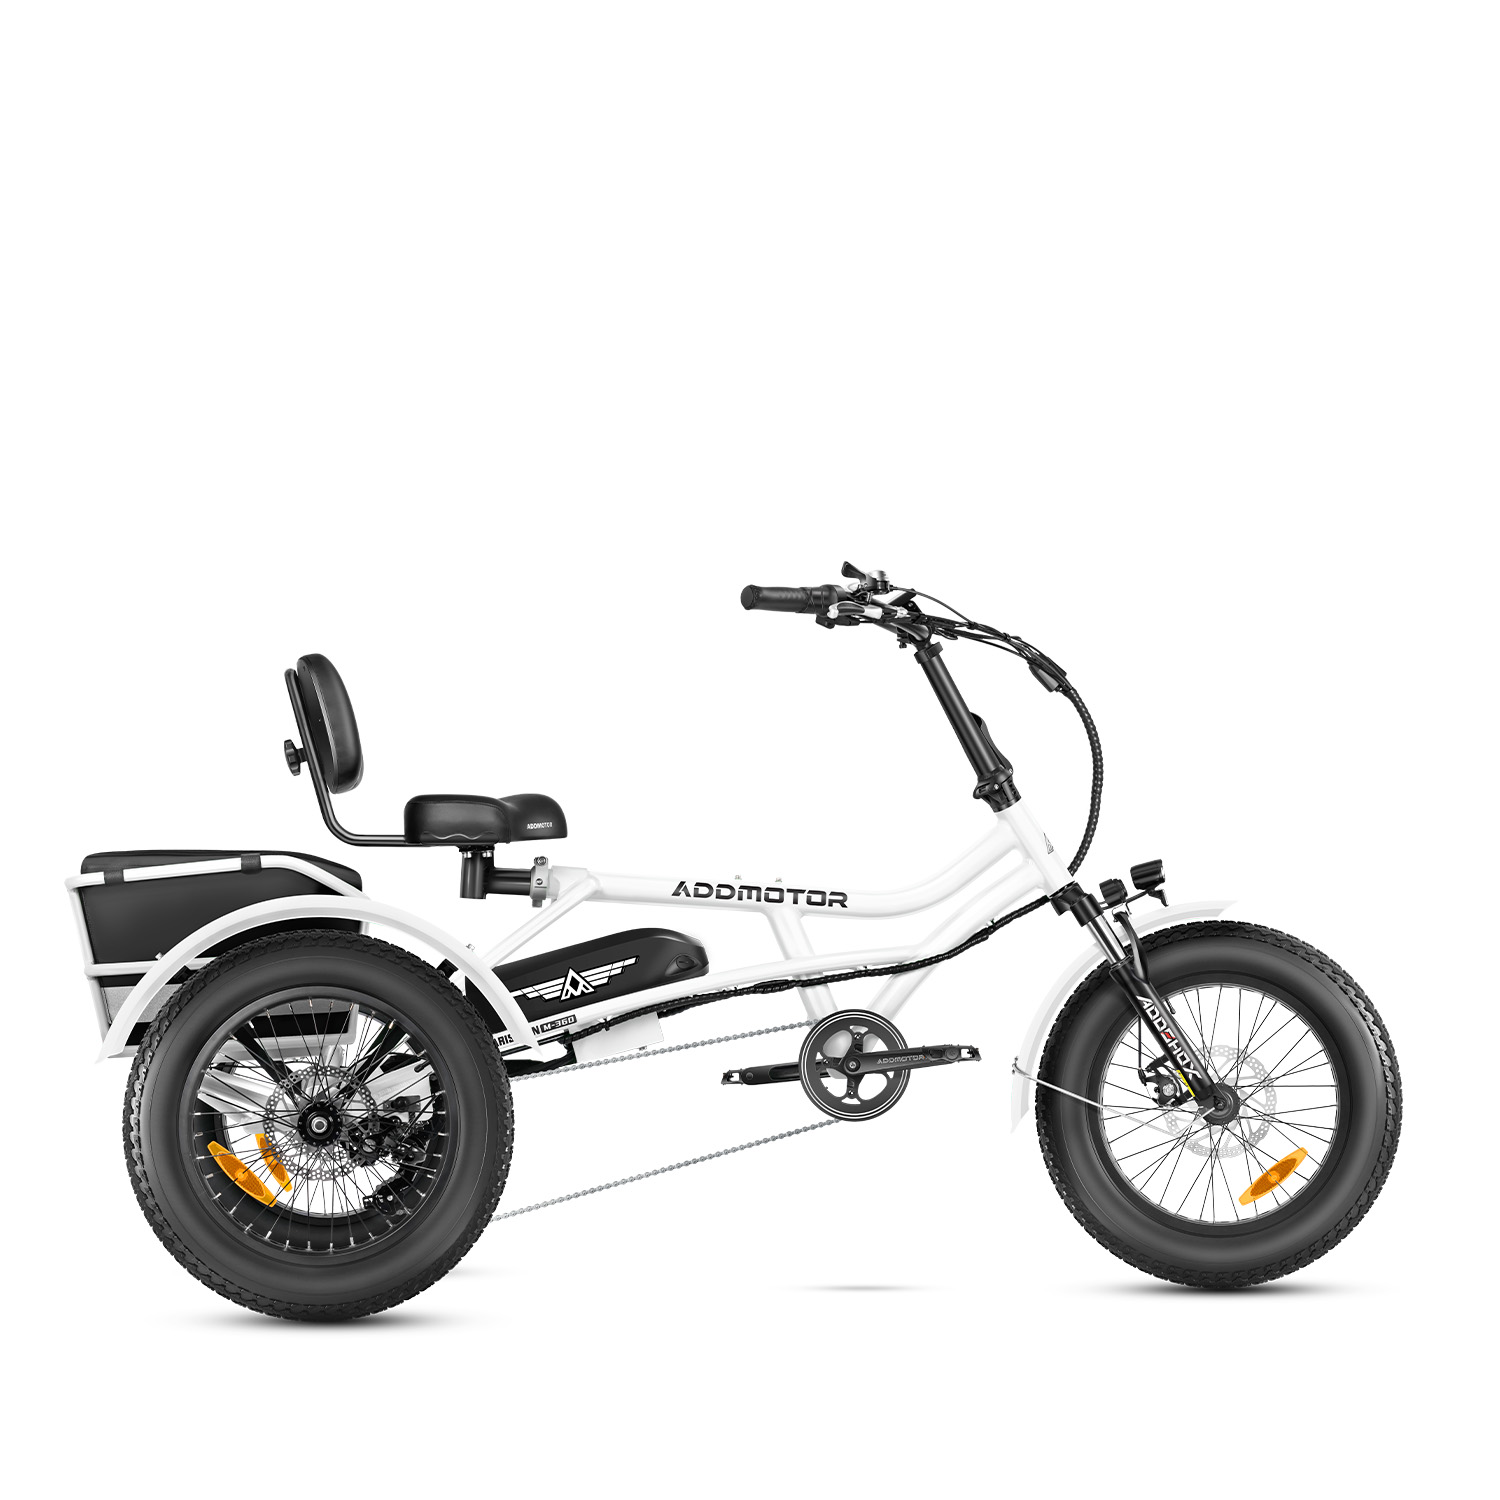 Addmotor Arisetan M-360 Mini Trike | Adult Semi-recumbent Electric Trike | Best Affordable Electric Tricycle with 750W Rear Motor | Pearl White